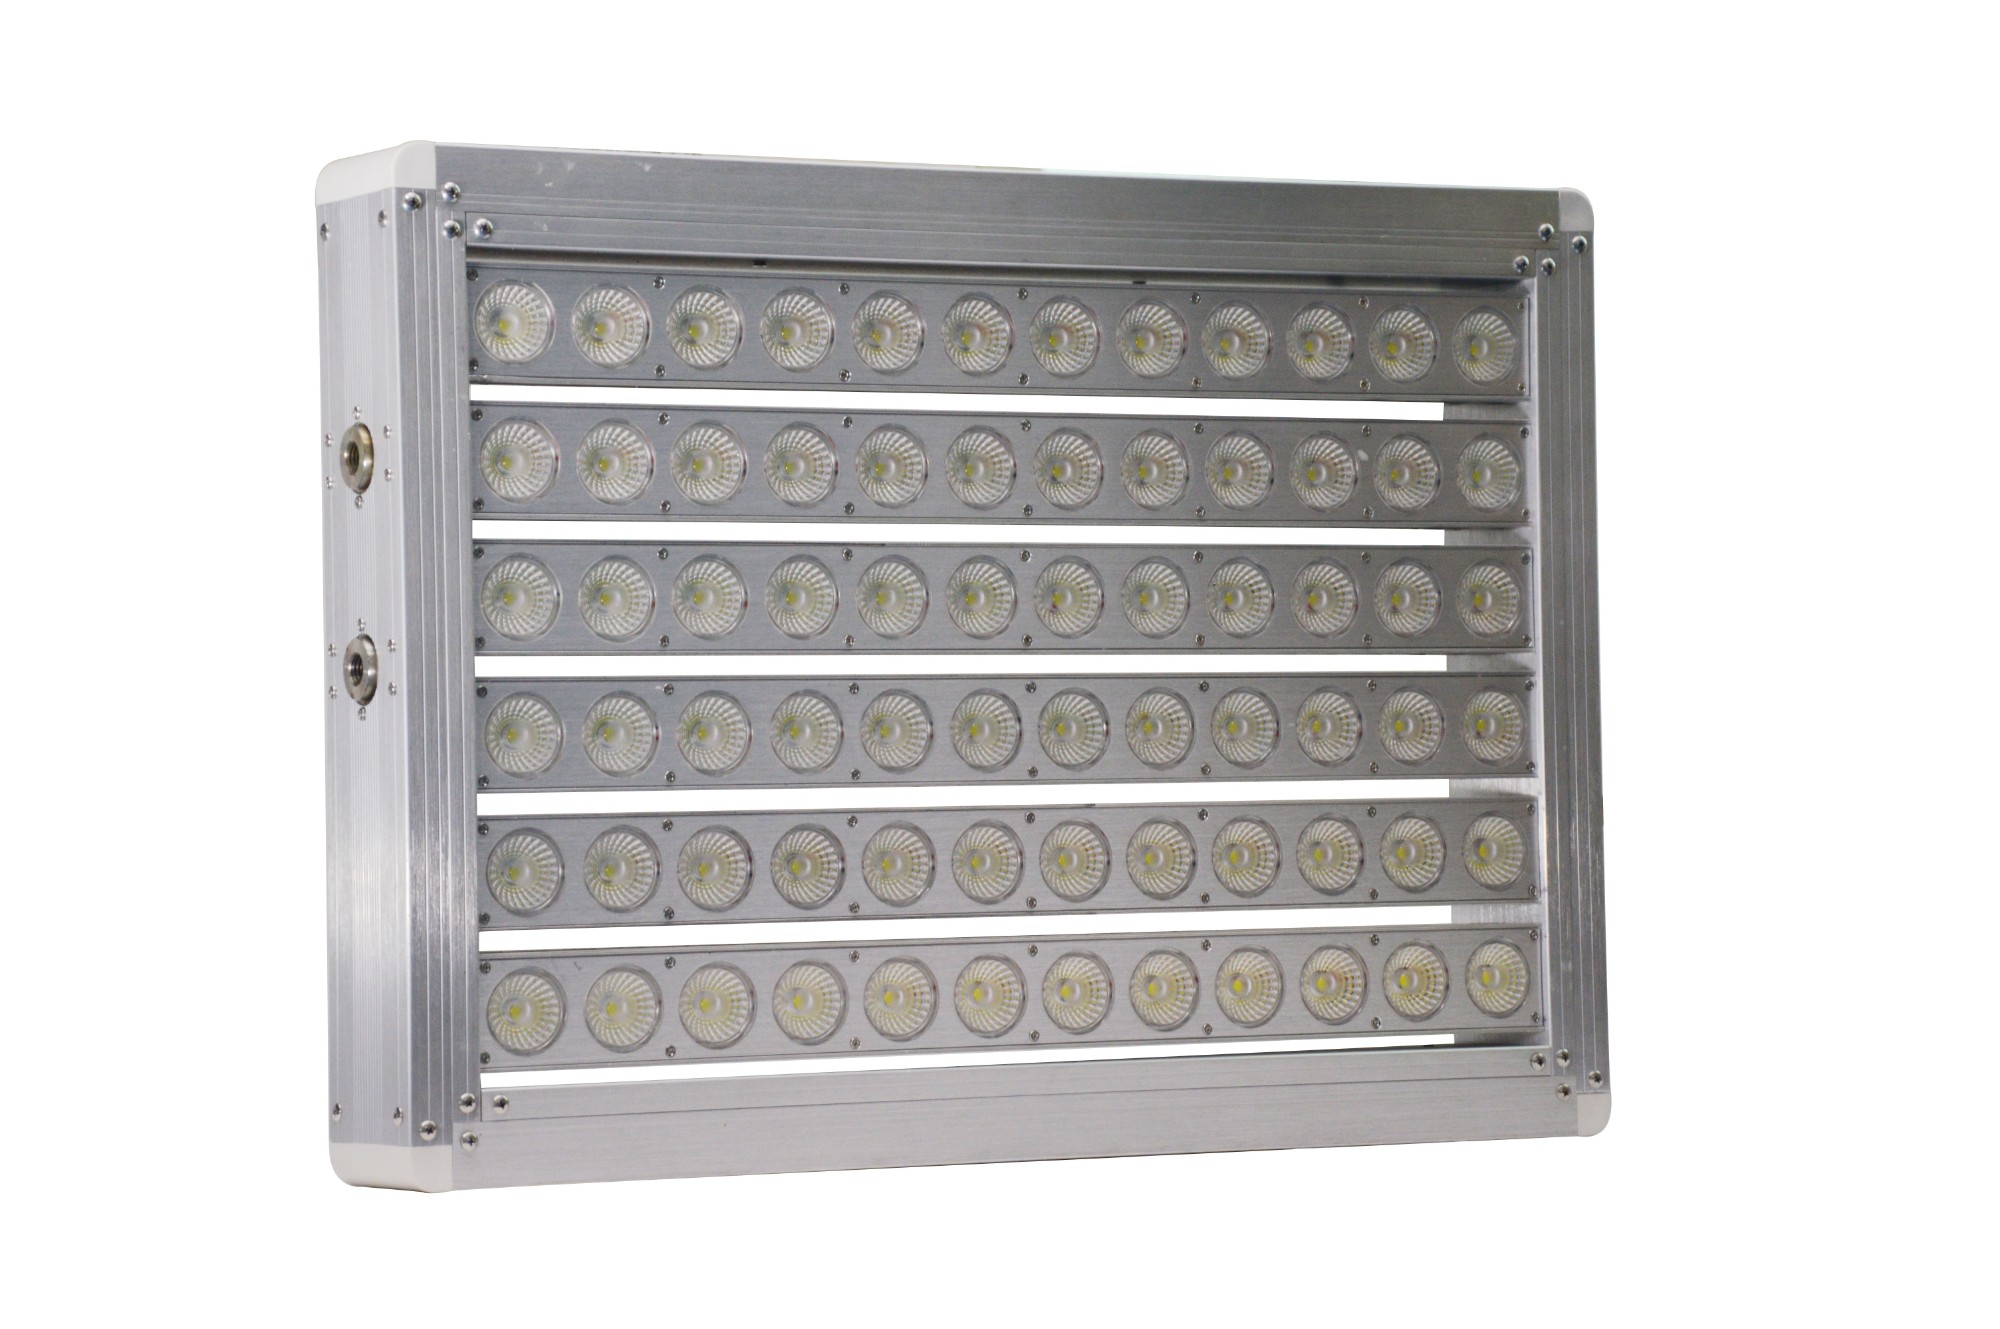 Acheter 720W Dimmable Outdoor Led Flood Sport Luminaires,720W Dimmable Outdoor Led Flood Sport Luminaires Prix,720W Dimmable Outdoor Led Flood Sport Luminaires Marques,720W Dimmable Outdoor Led Flood Sport Luminaires Fabricant,720W Dimmable Outdoor Led Flood Sport Luminaires Quotes,720W Dimmable Outdoor Led Flood Sport Luminaires Société,